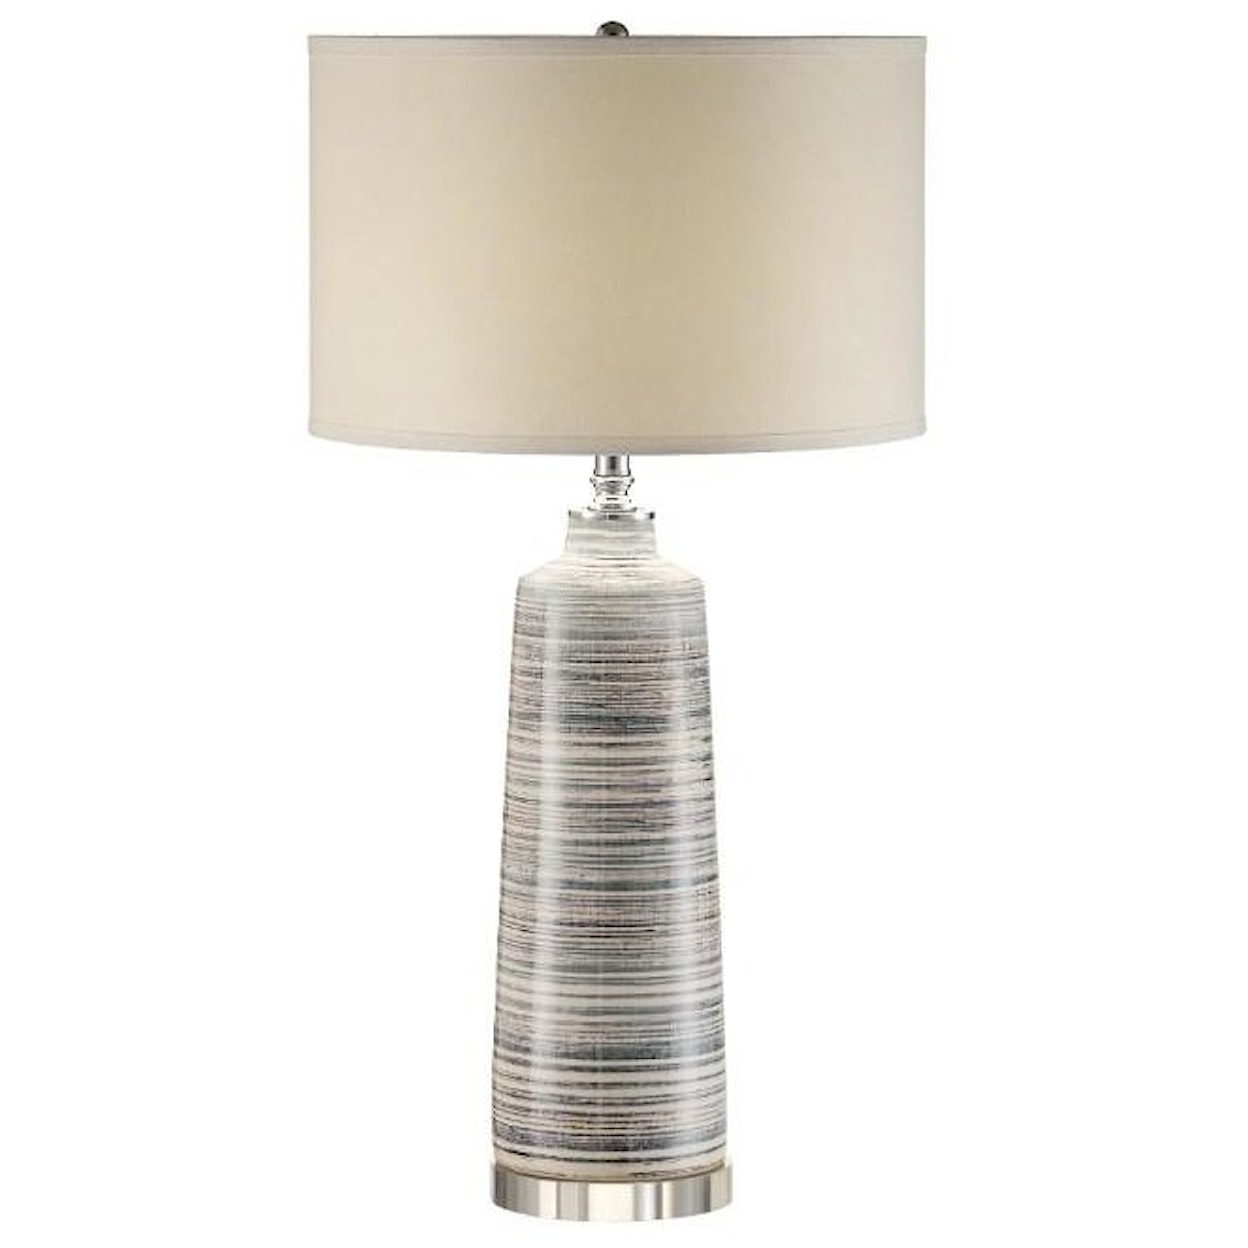 Crestview Collection Lighting Baron Table Lamp